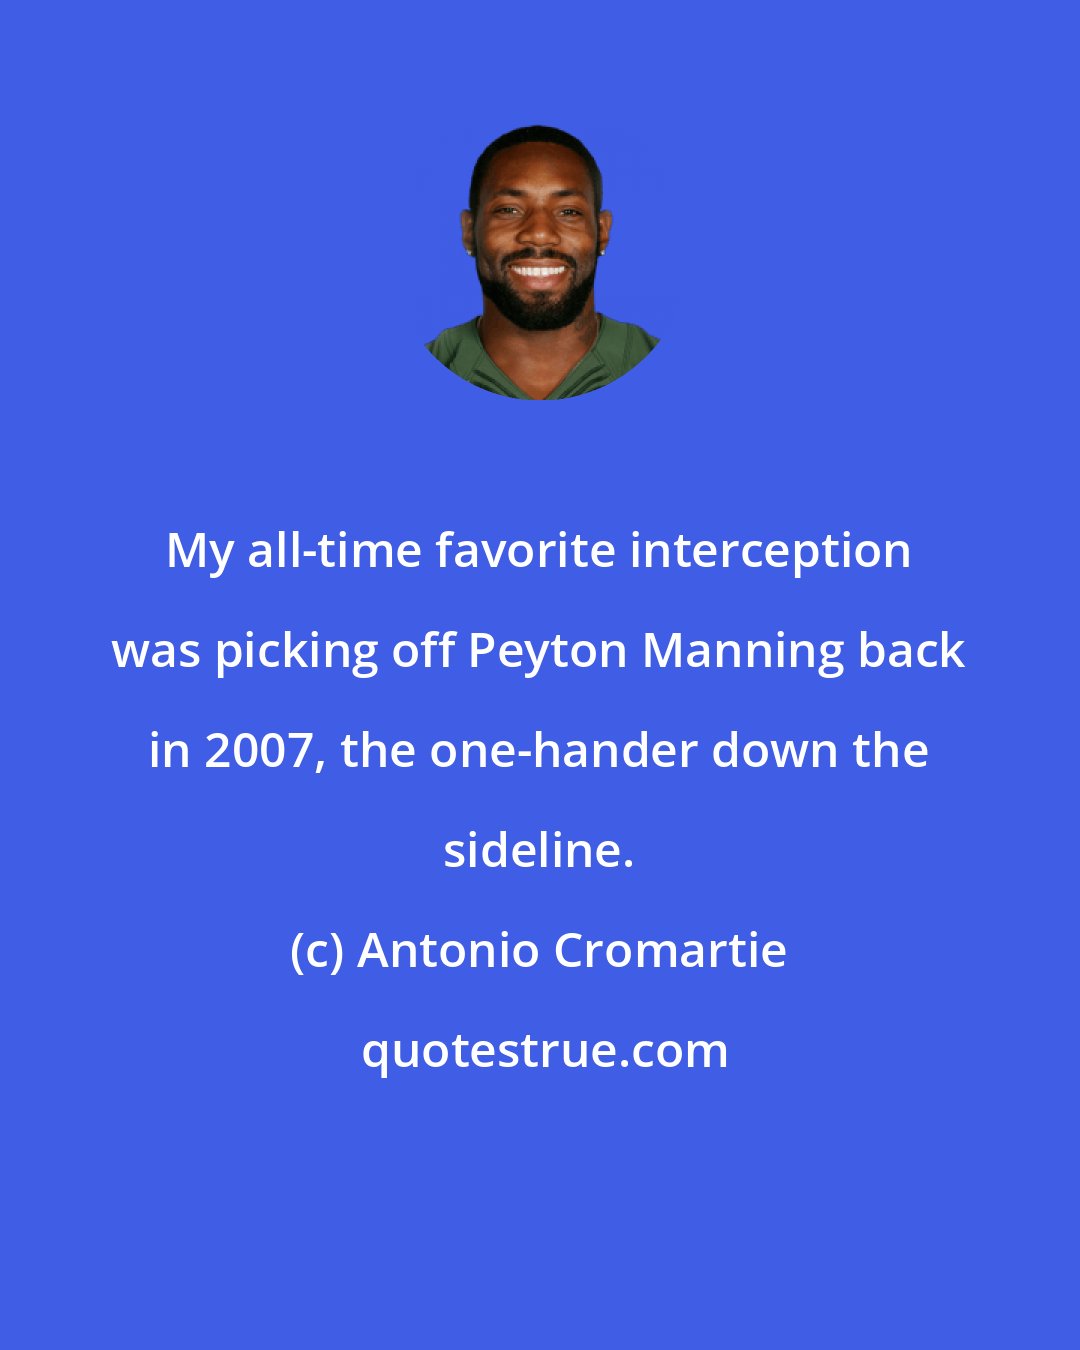 Antonio Cromartie: My all-time favorite interception was picking off Peyton Manning back in 2007, the one-hander down the sideline.